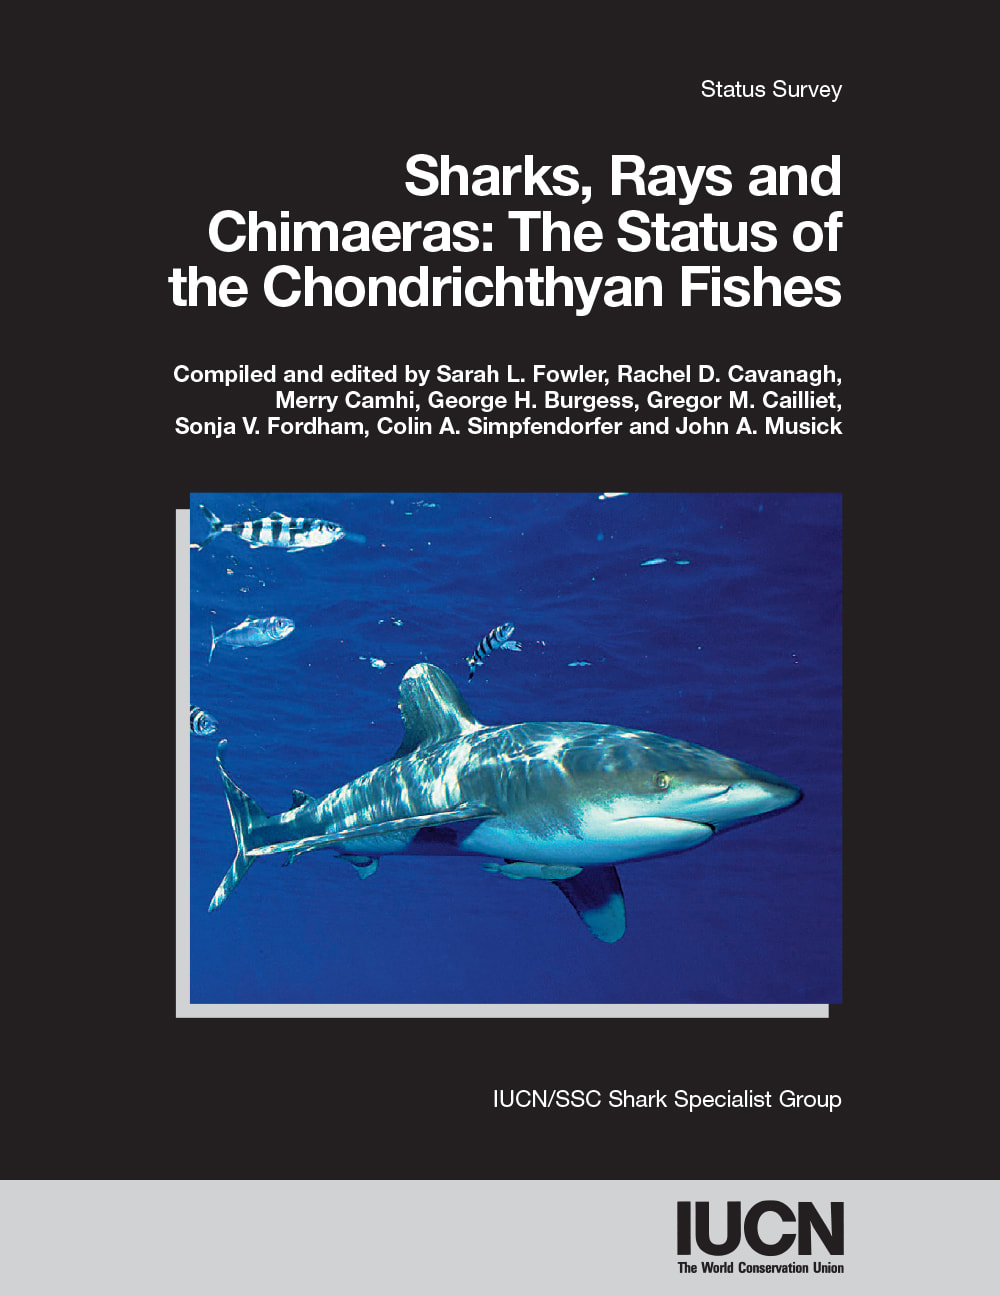 Sharks, Rays and Chimaeras: The Status of the Chondrichthyan Fishes